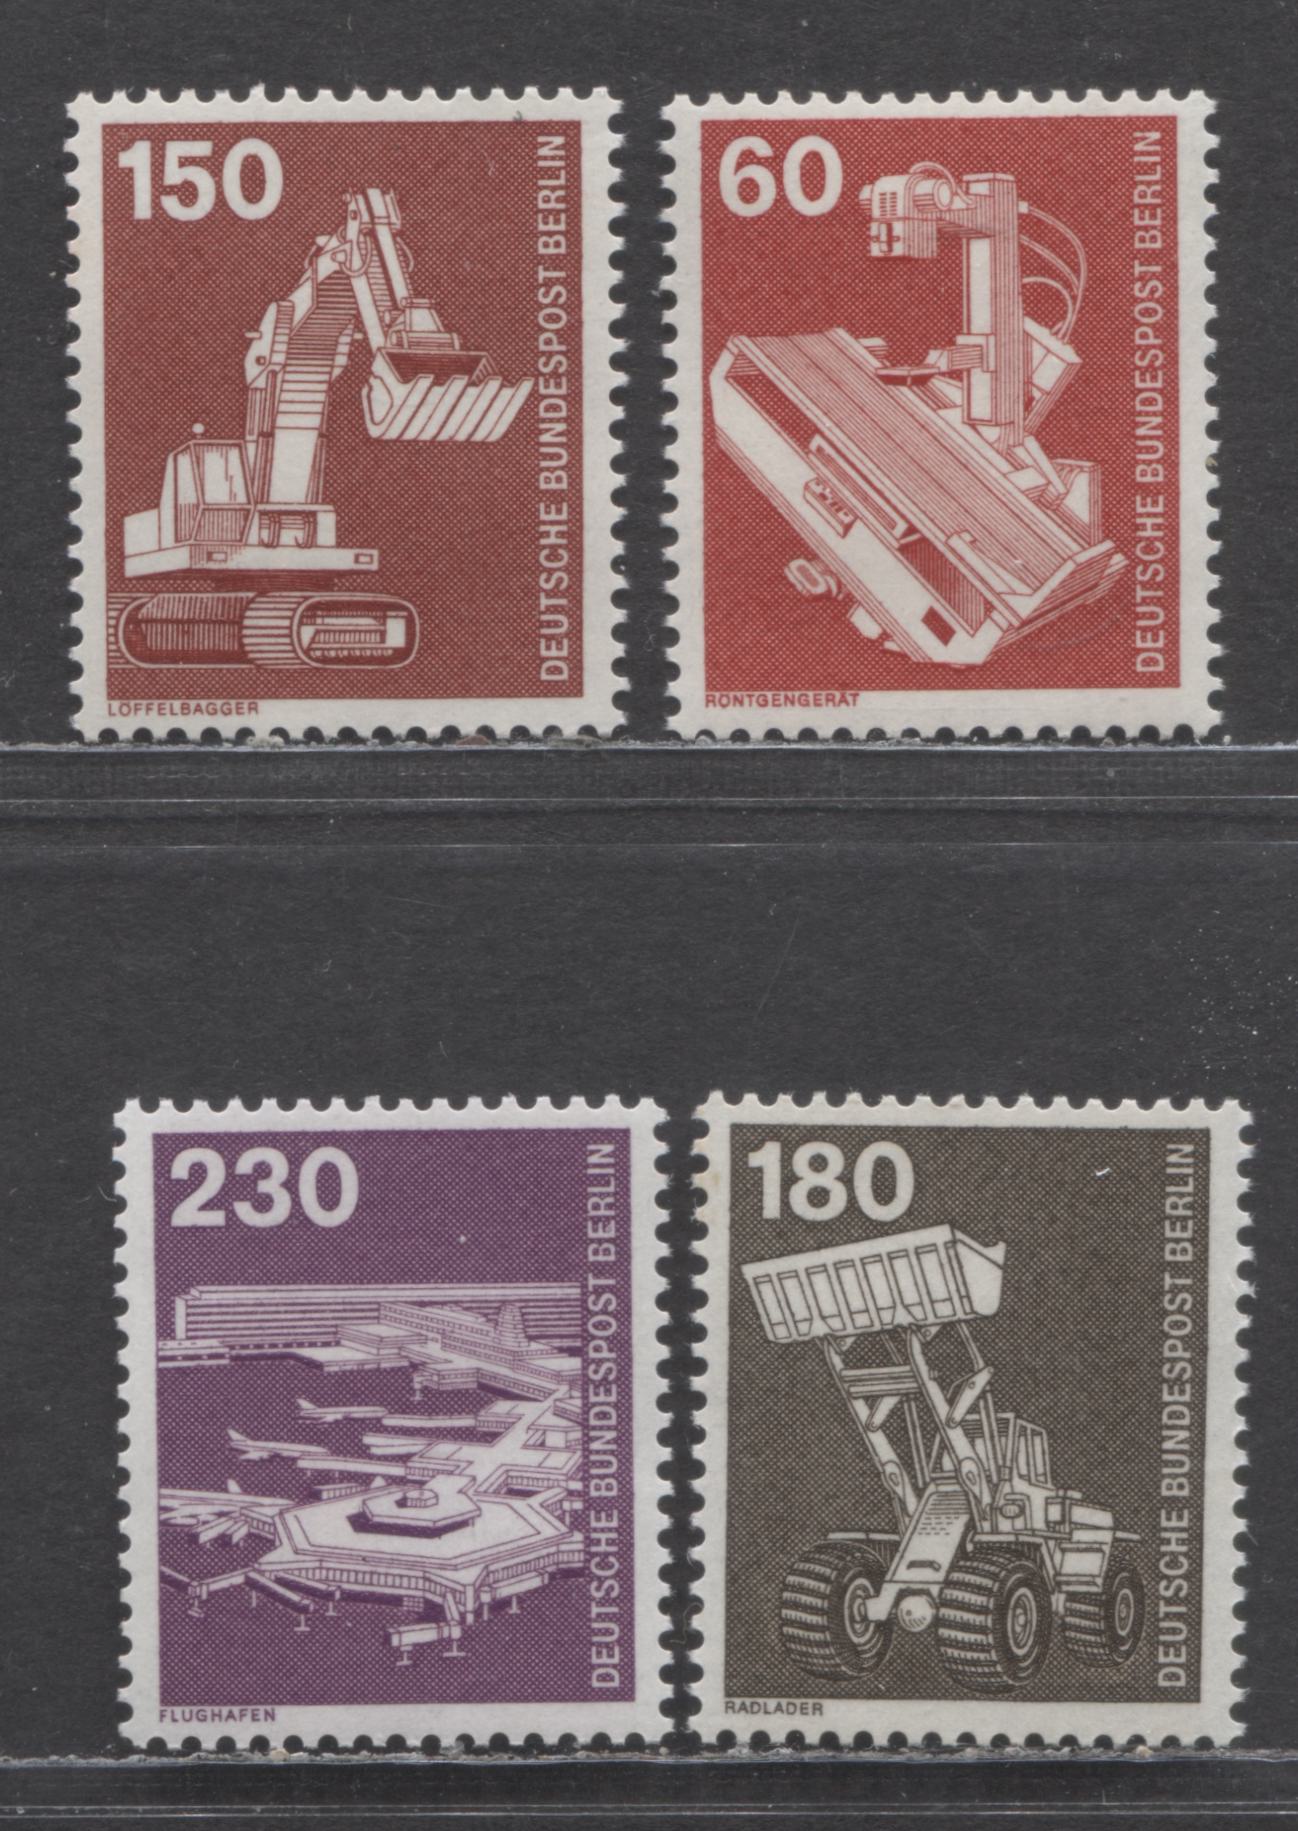 Berlin-Germany SC#9N365/9N375(Mi#582-586) 1978 Industry Definitives Issue, 4 VFNH Singles, Click on Listing to See ALL Pictures, Estimated Value $10 USD